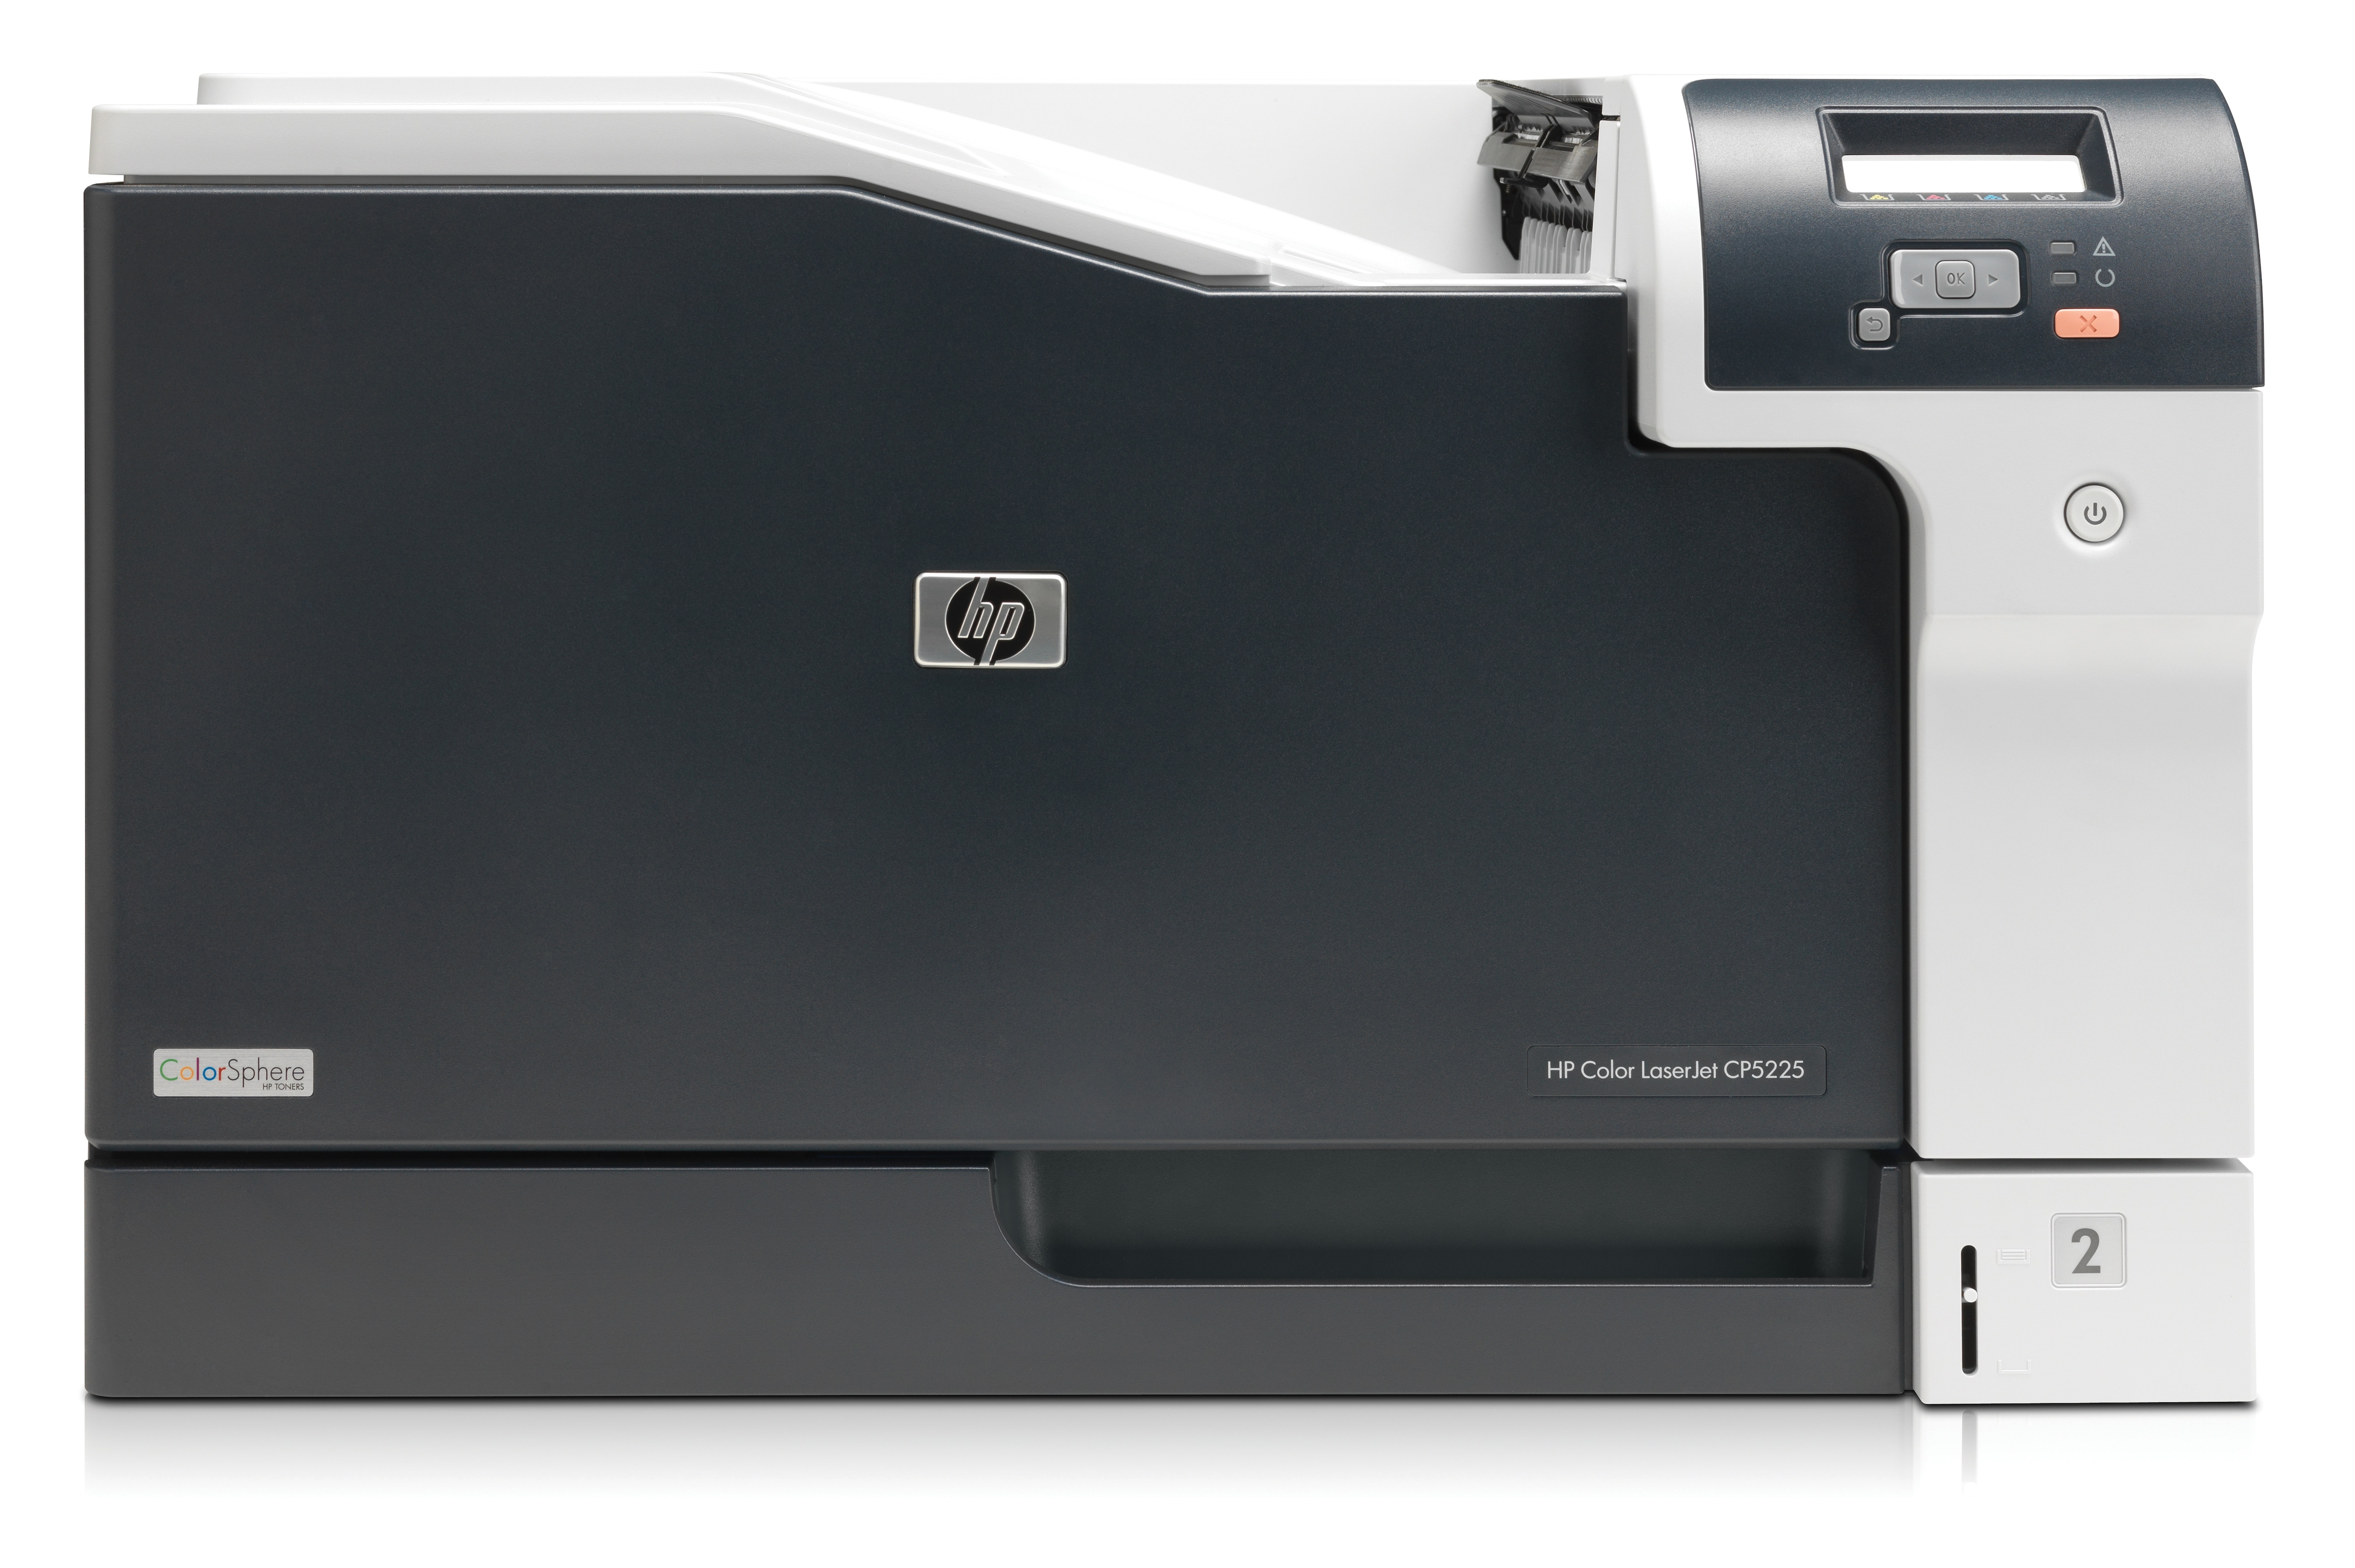 CE712A#B19 HP Color LaserJet Professional CP5225dn A3 Printer - Refurbished with 3 months RTB Warranty.